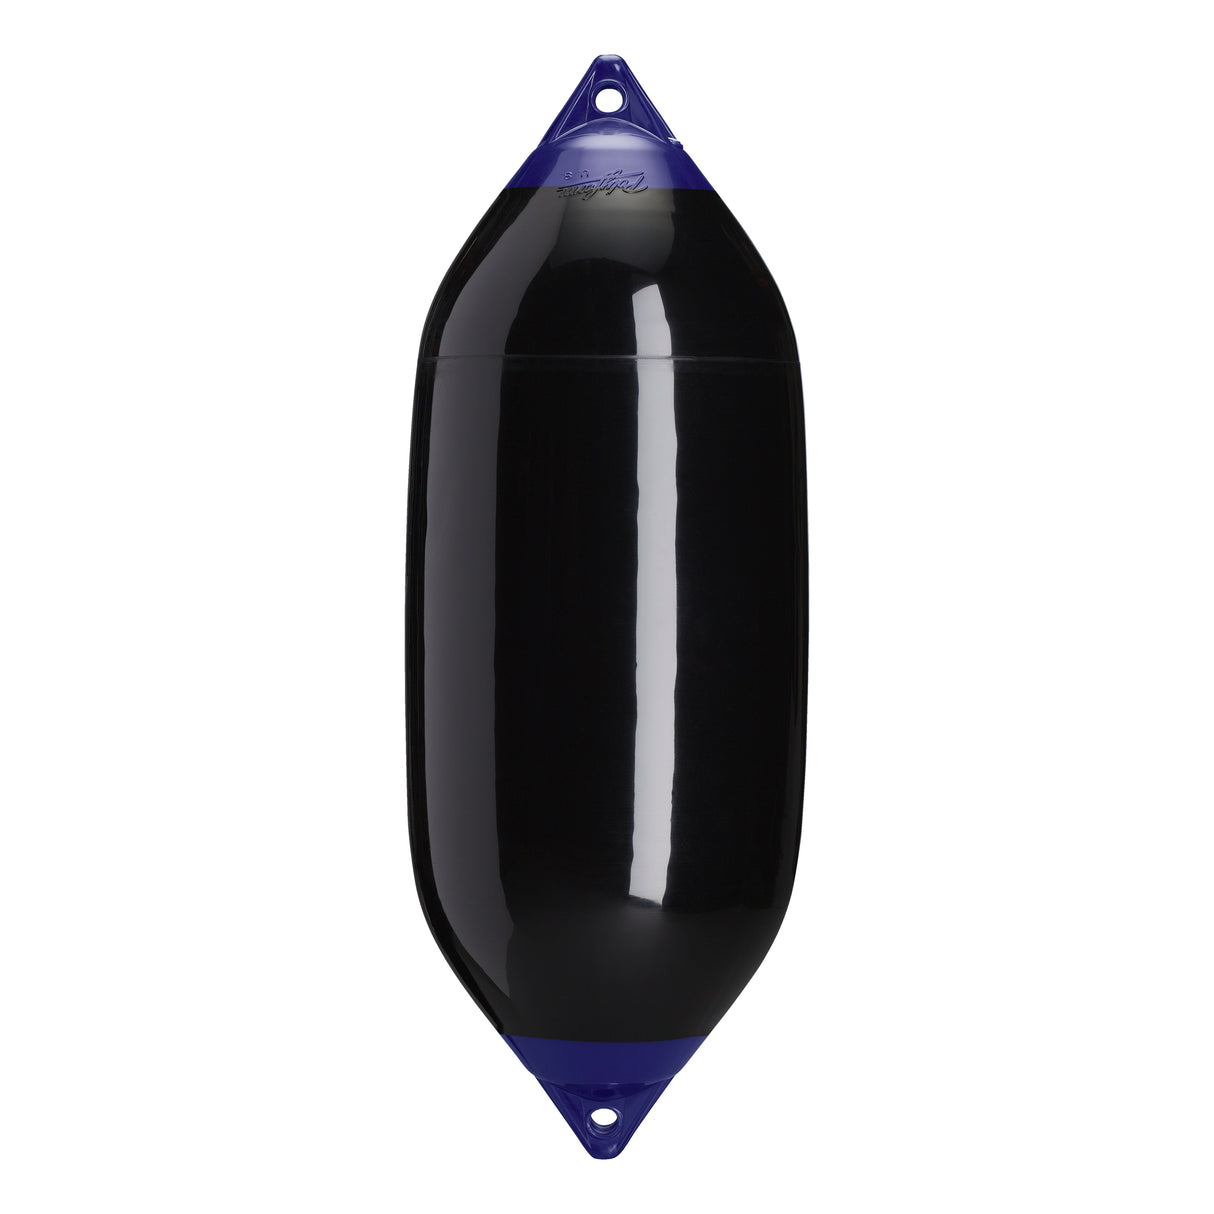 Black boat fender with Navy-Top, Polyform F-7 